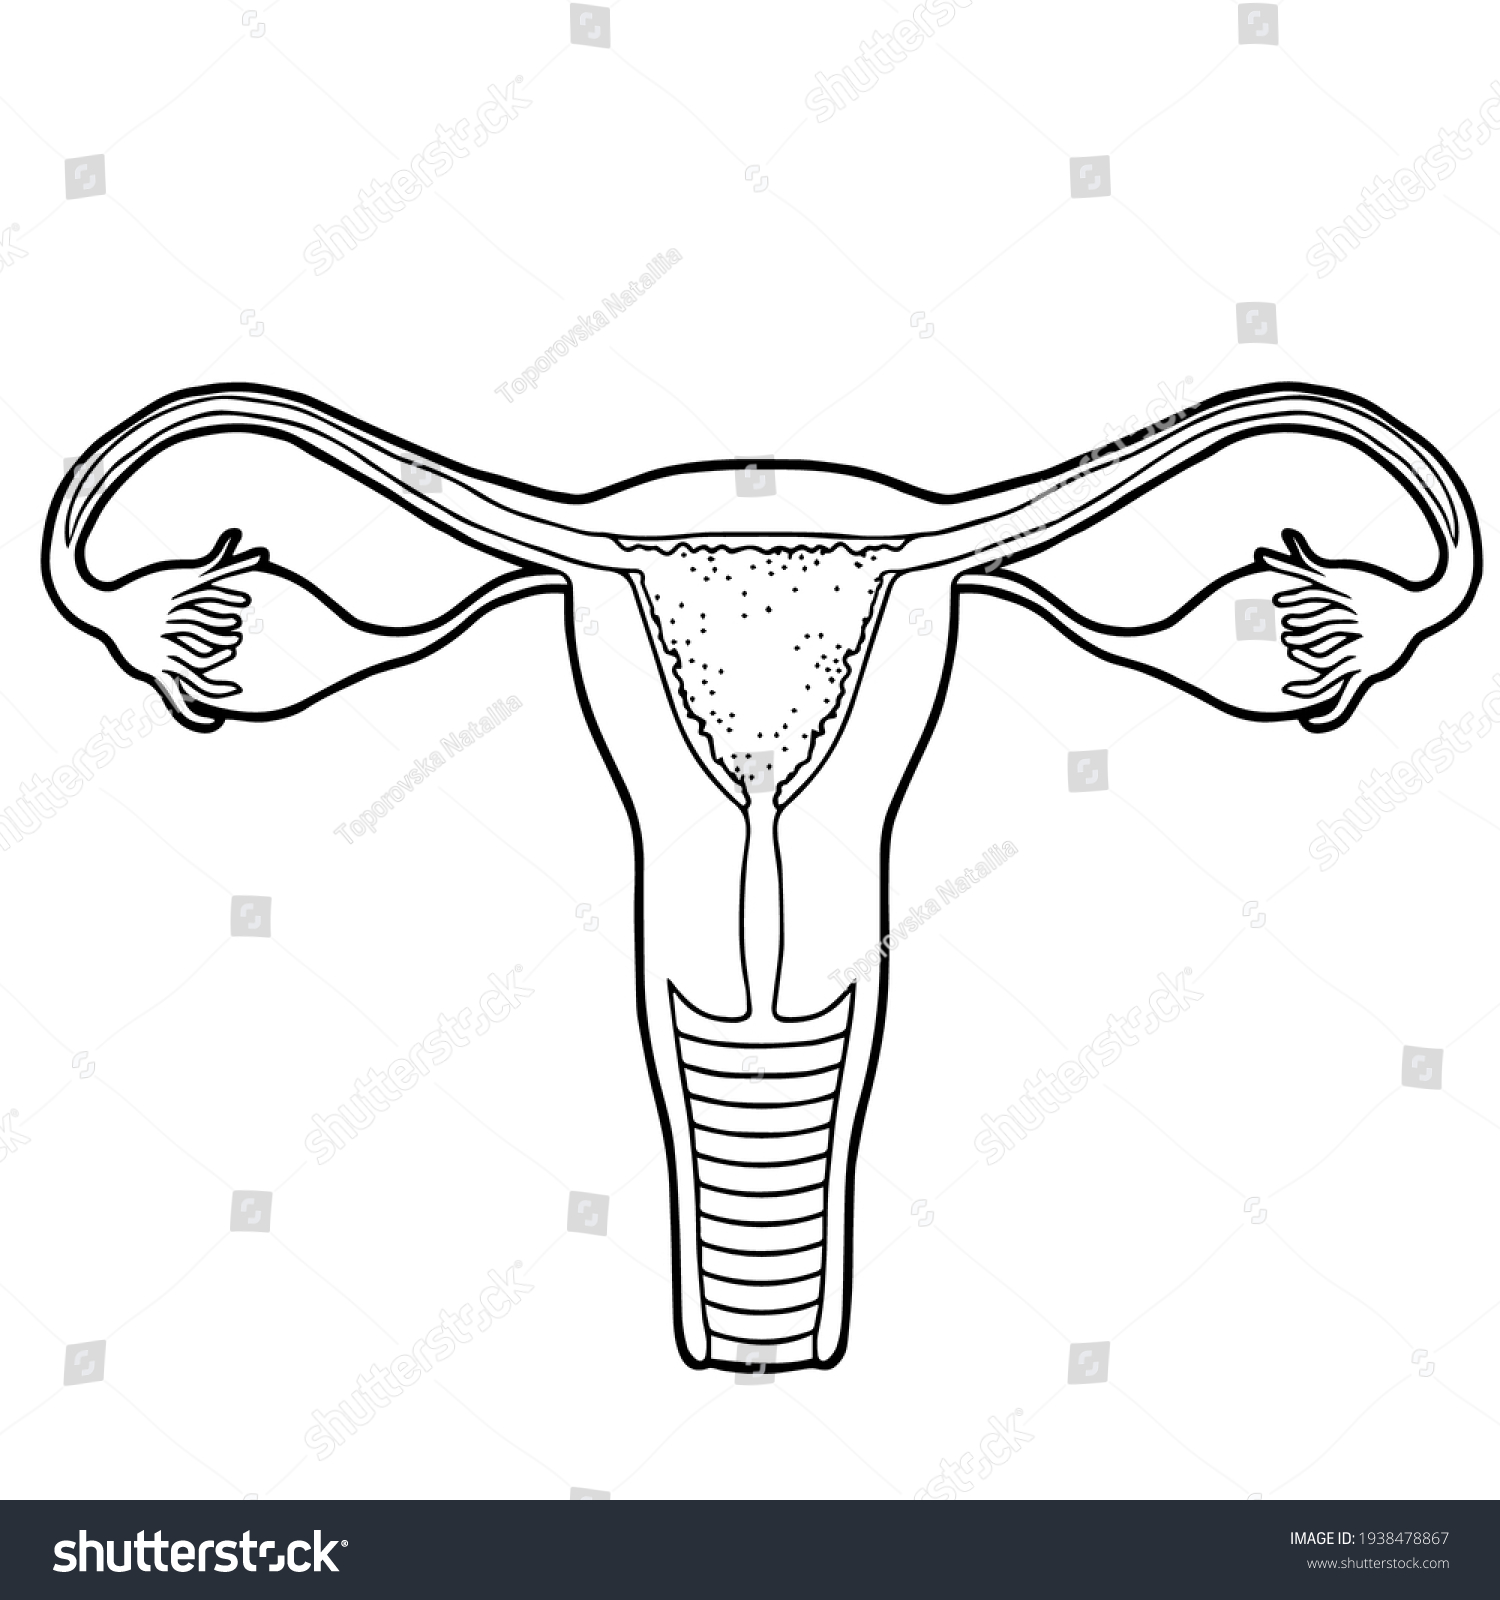 Healthy Beauty Female Reproductive System Stock Vector Royalty Free 1938478867 Shutterstock 8475